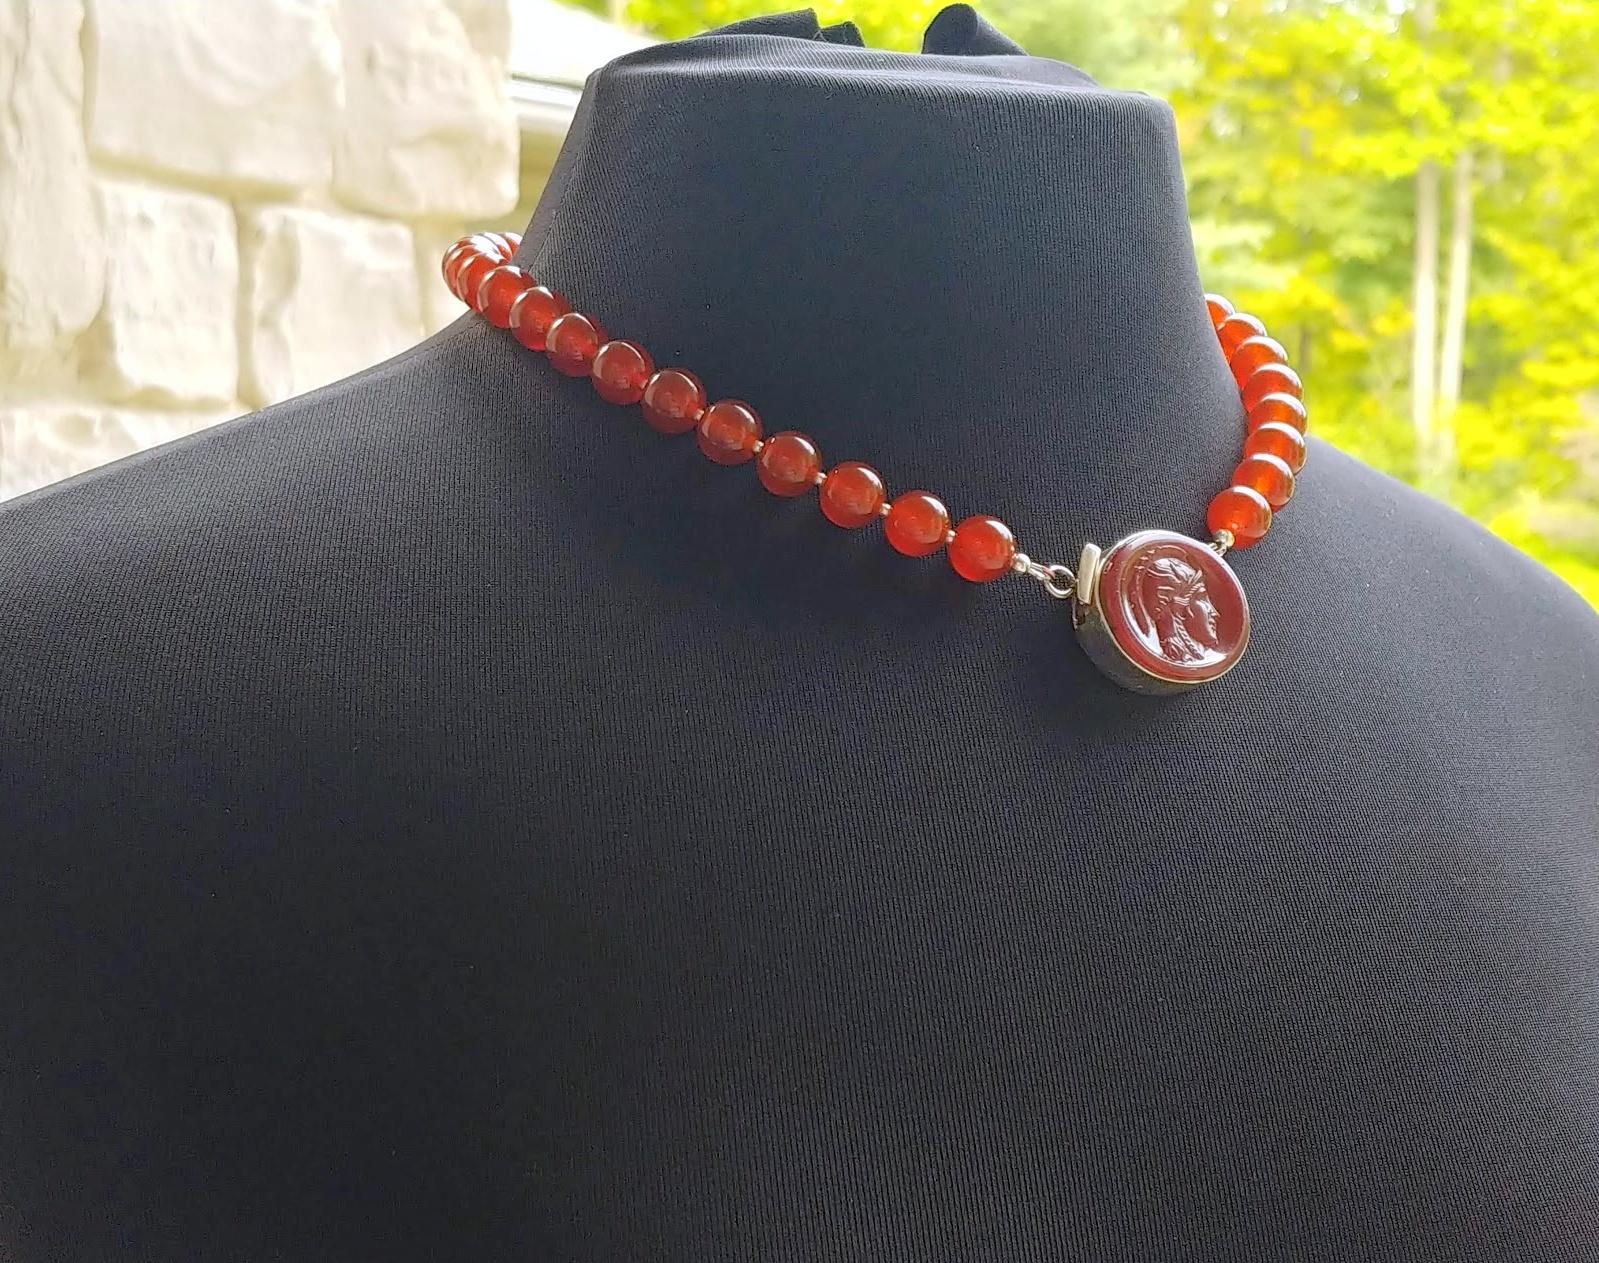 The length of the necklace is 19 inches (48 cm). The size of smooth round beads is 10 mm.
The color of the beads is uniform, semi-transparent, the color of red currant or the warm shade of strawberry jam. In bright sunlight, the necklace is caramel